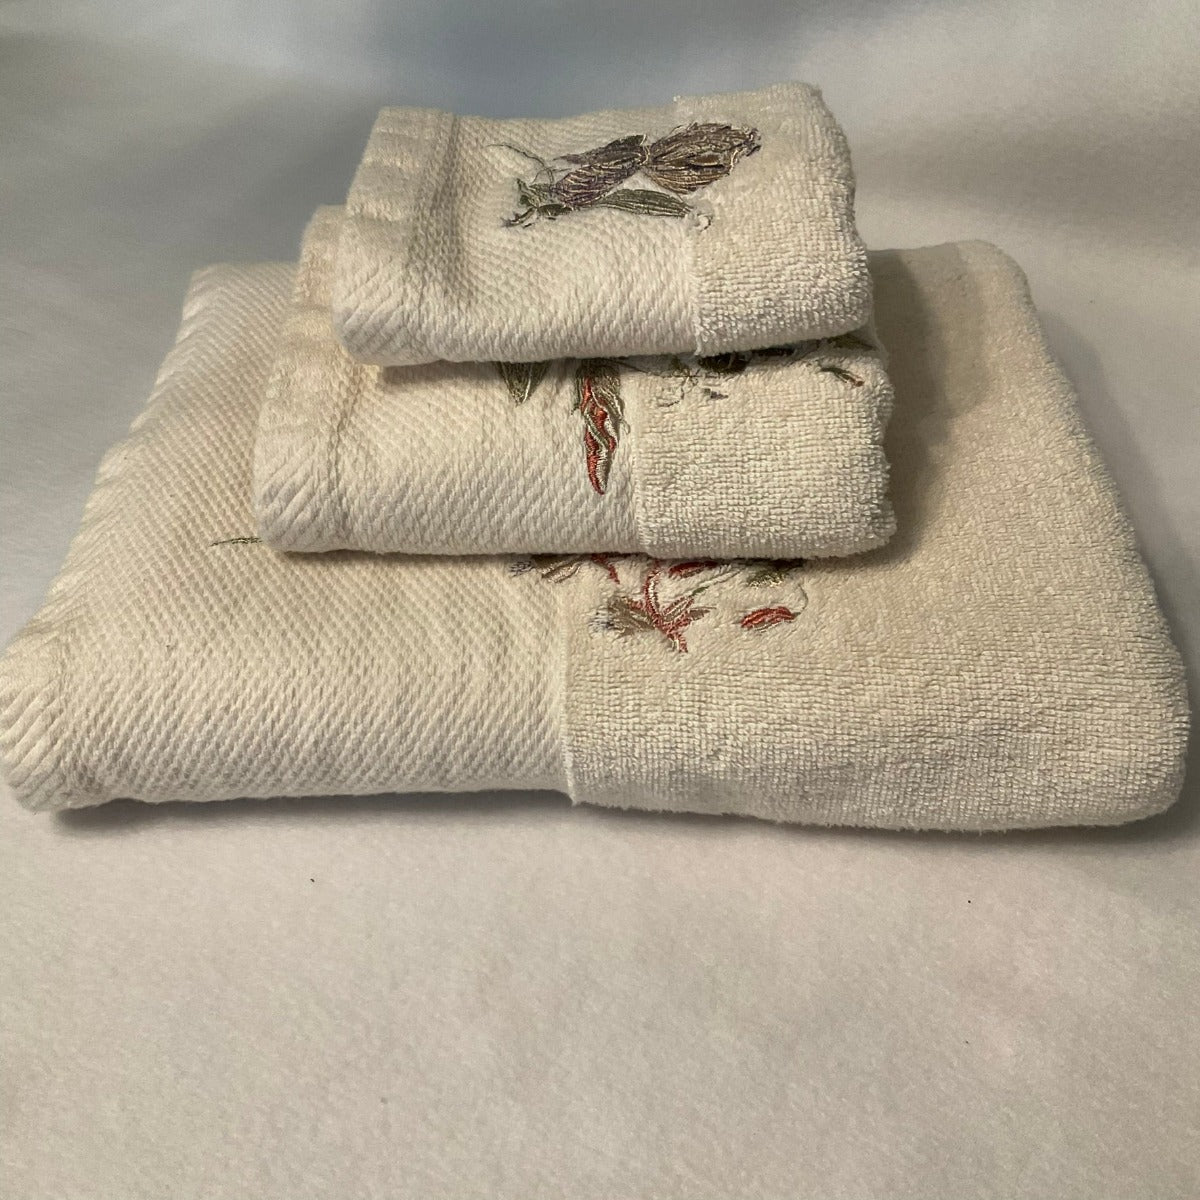 Bathroom Towels with Floral Pattern - Set of 3 - Stacked